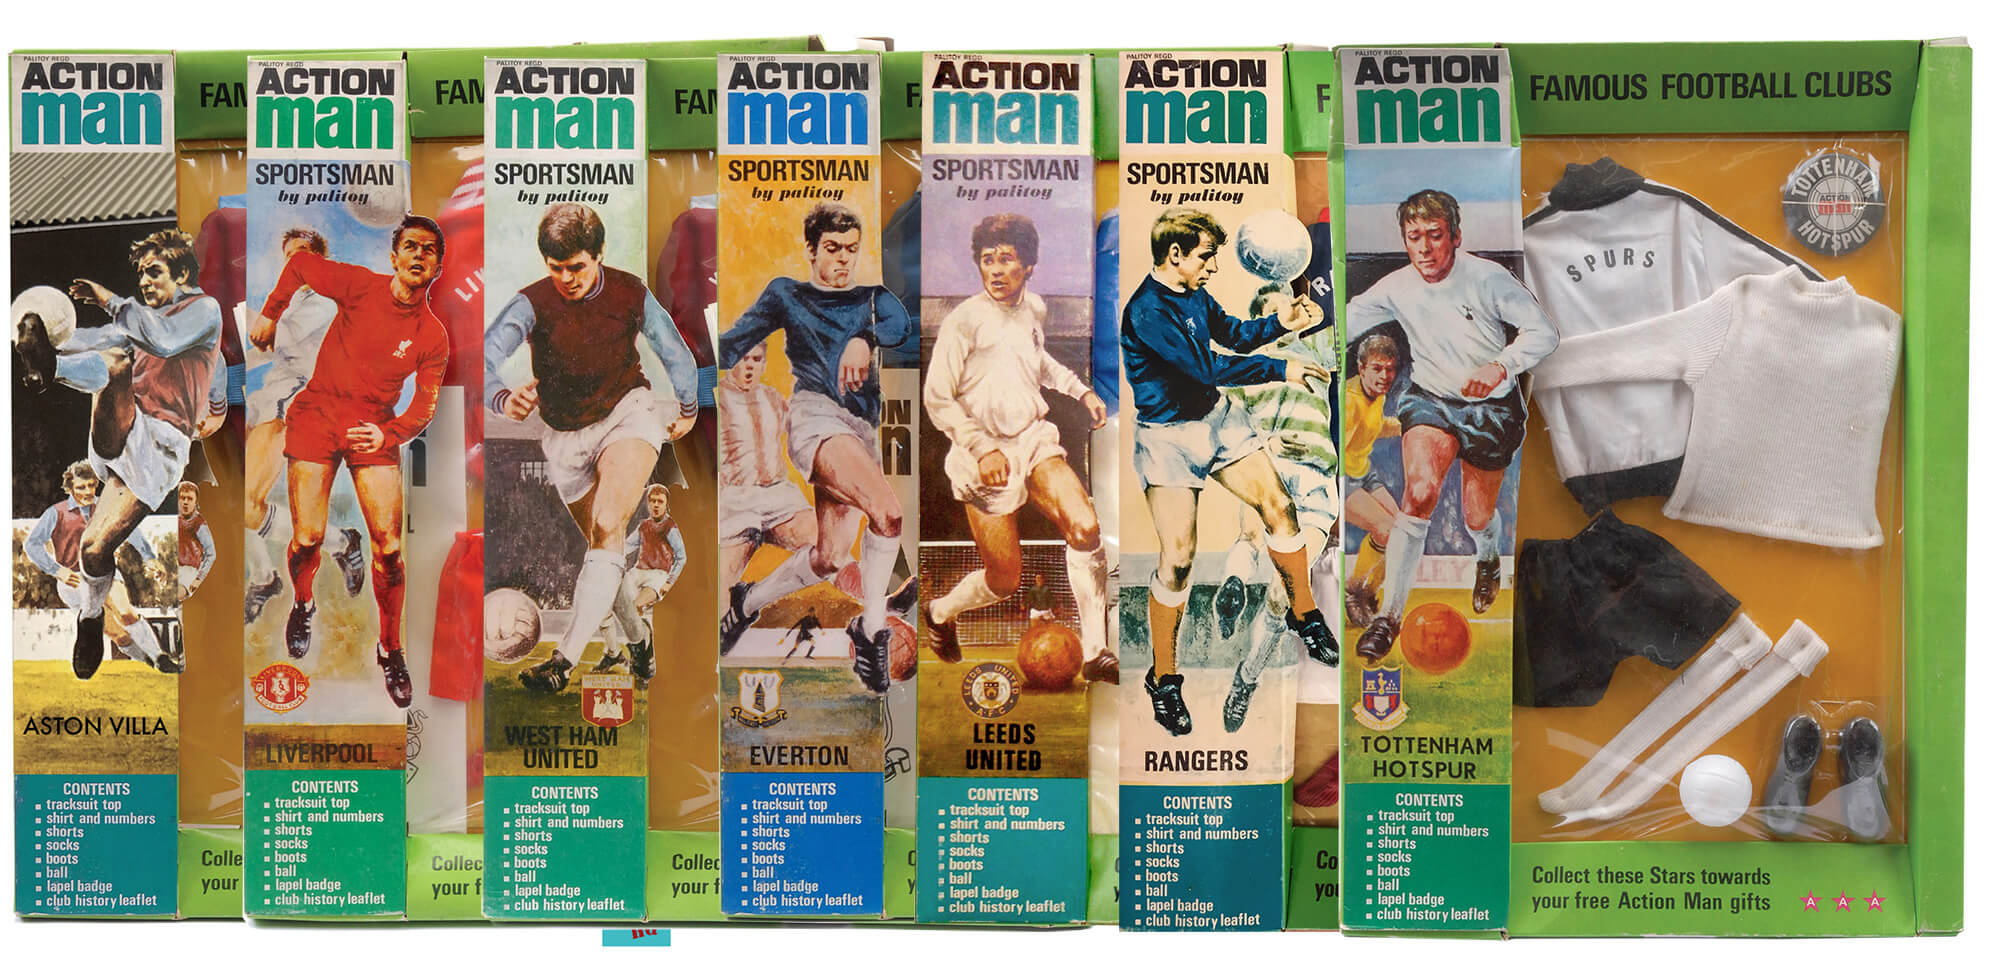 Action Man Football Clubs boxes